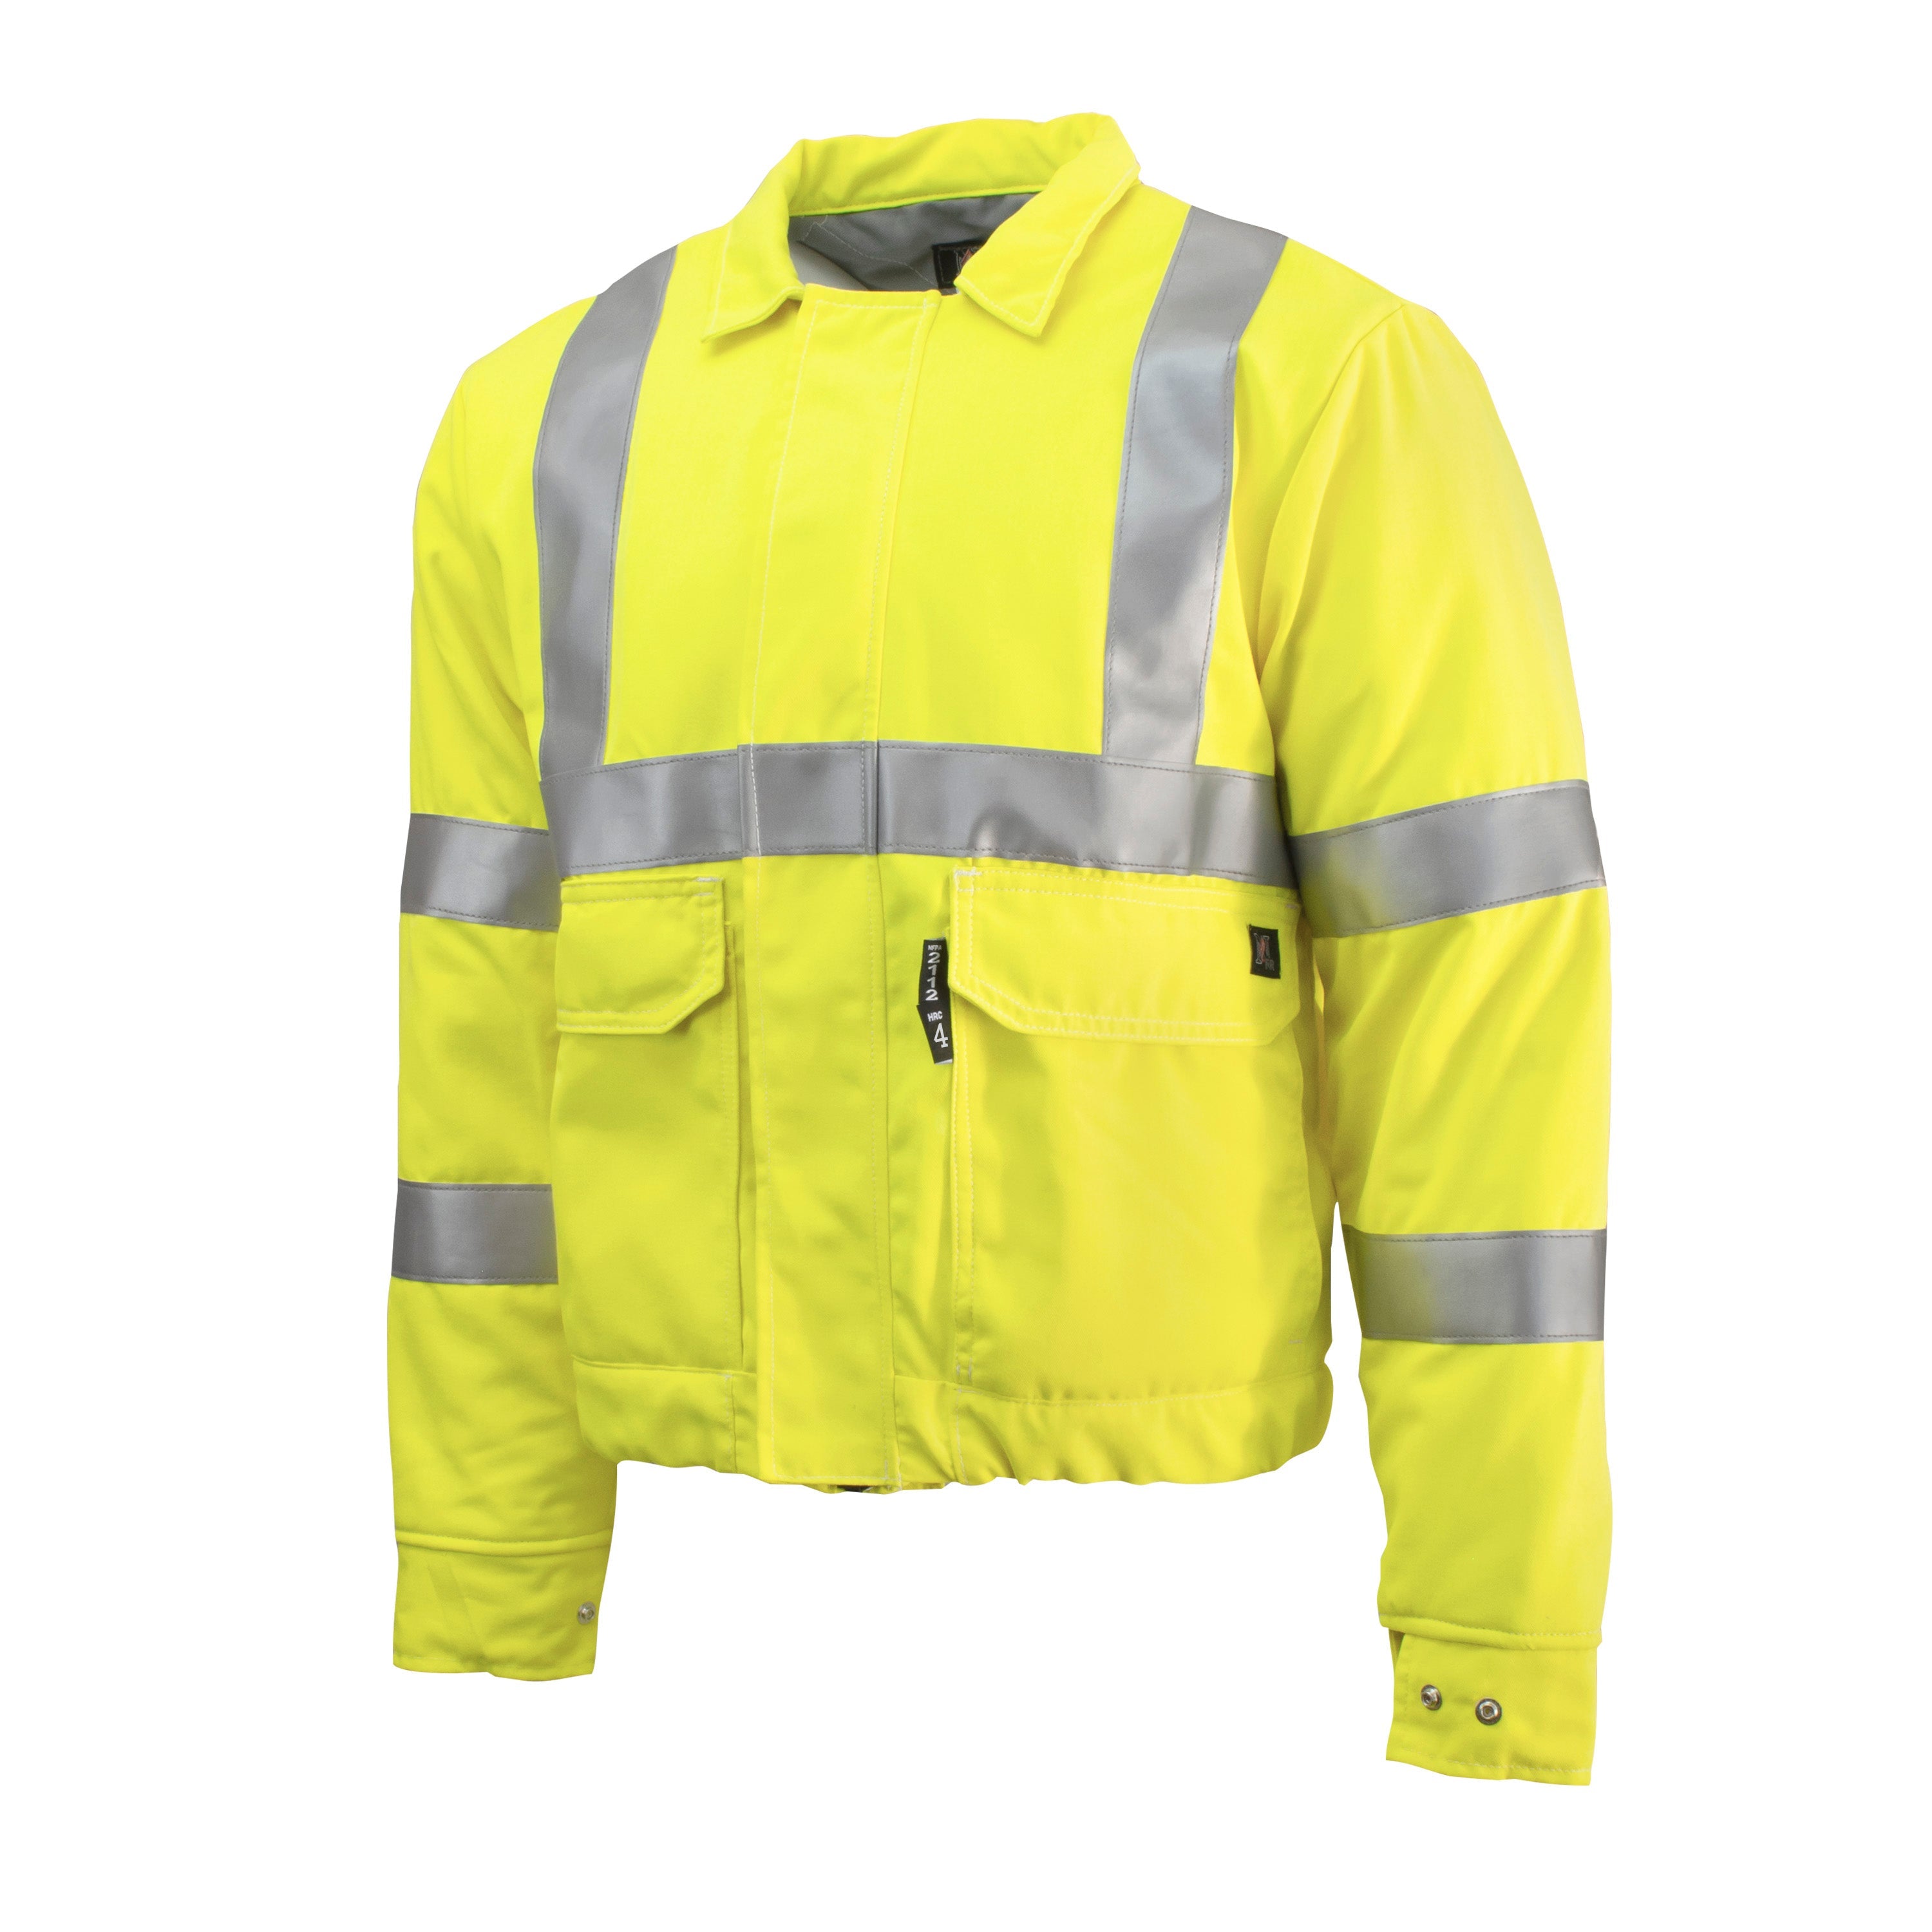 Neese VM7JBL3 High Visibility FR Jacket with FR InsulAir® Quilted Lining